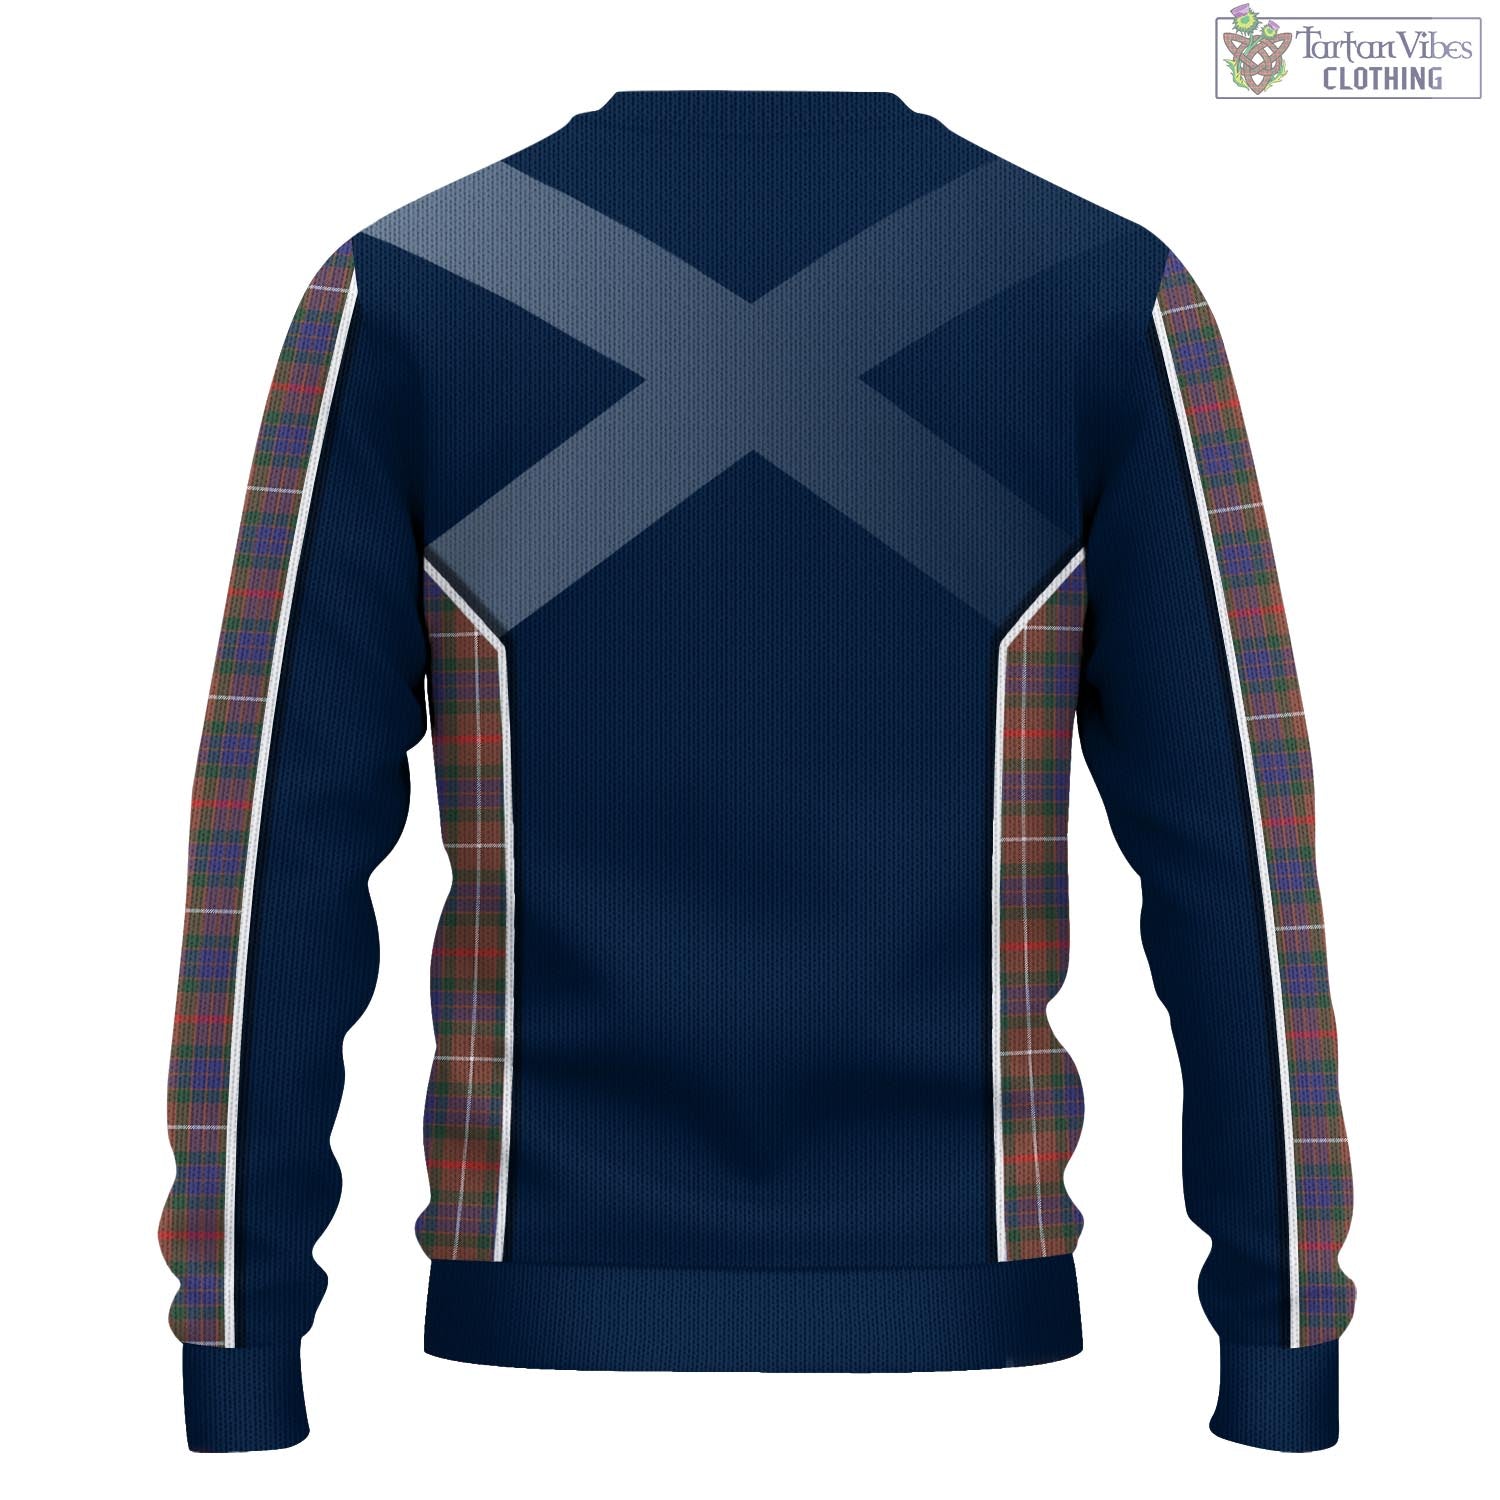 Tartan Vibes Clothing Fraser Hunting Modern Tartan Knitted Sweatshirt with Family Crest and Scottish Thistle Vibes Sport Style